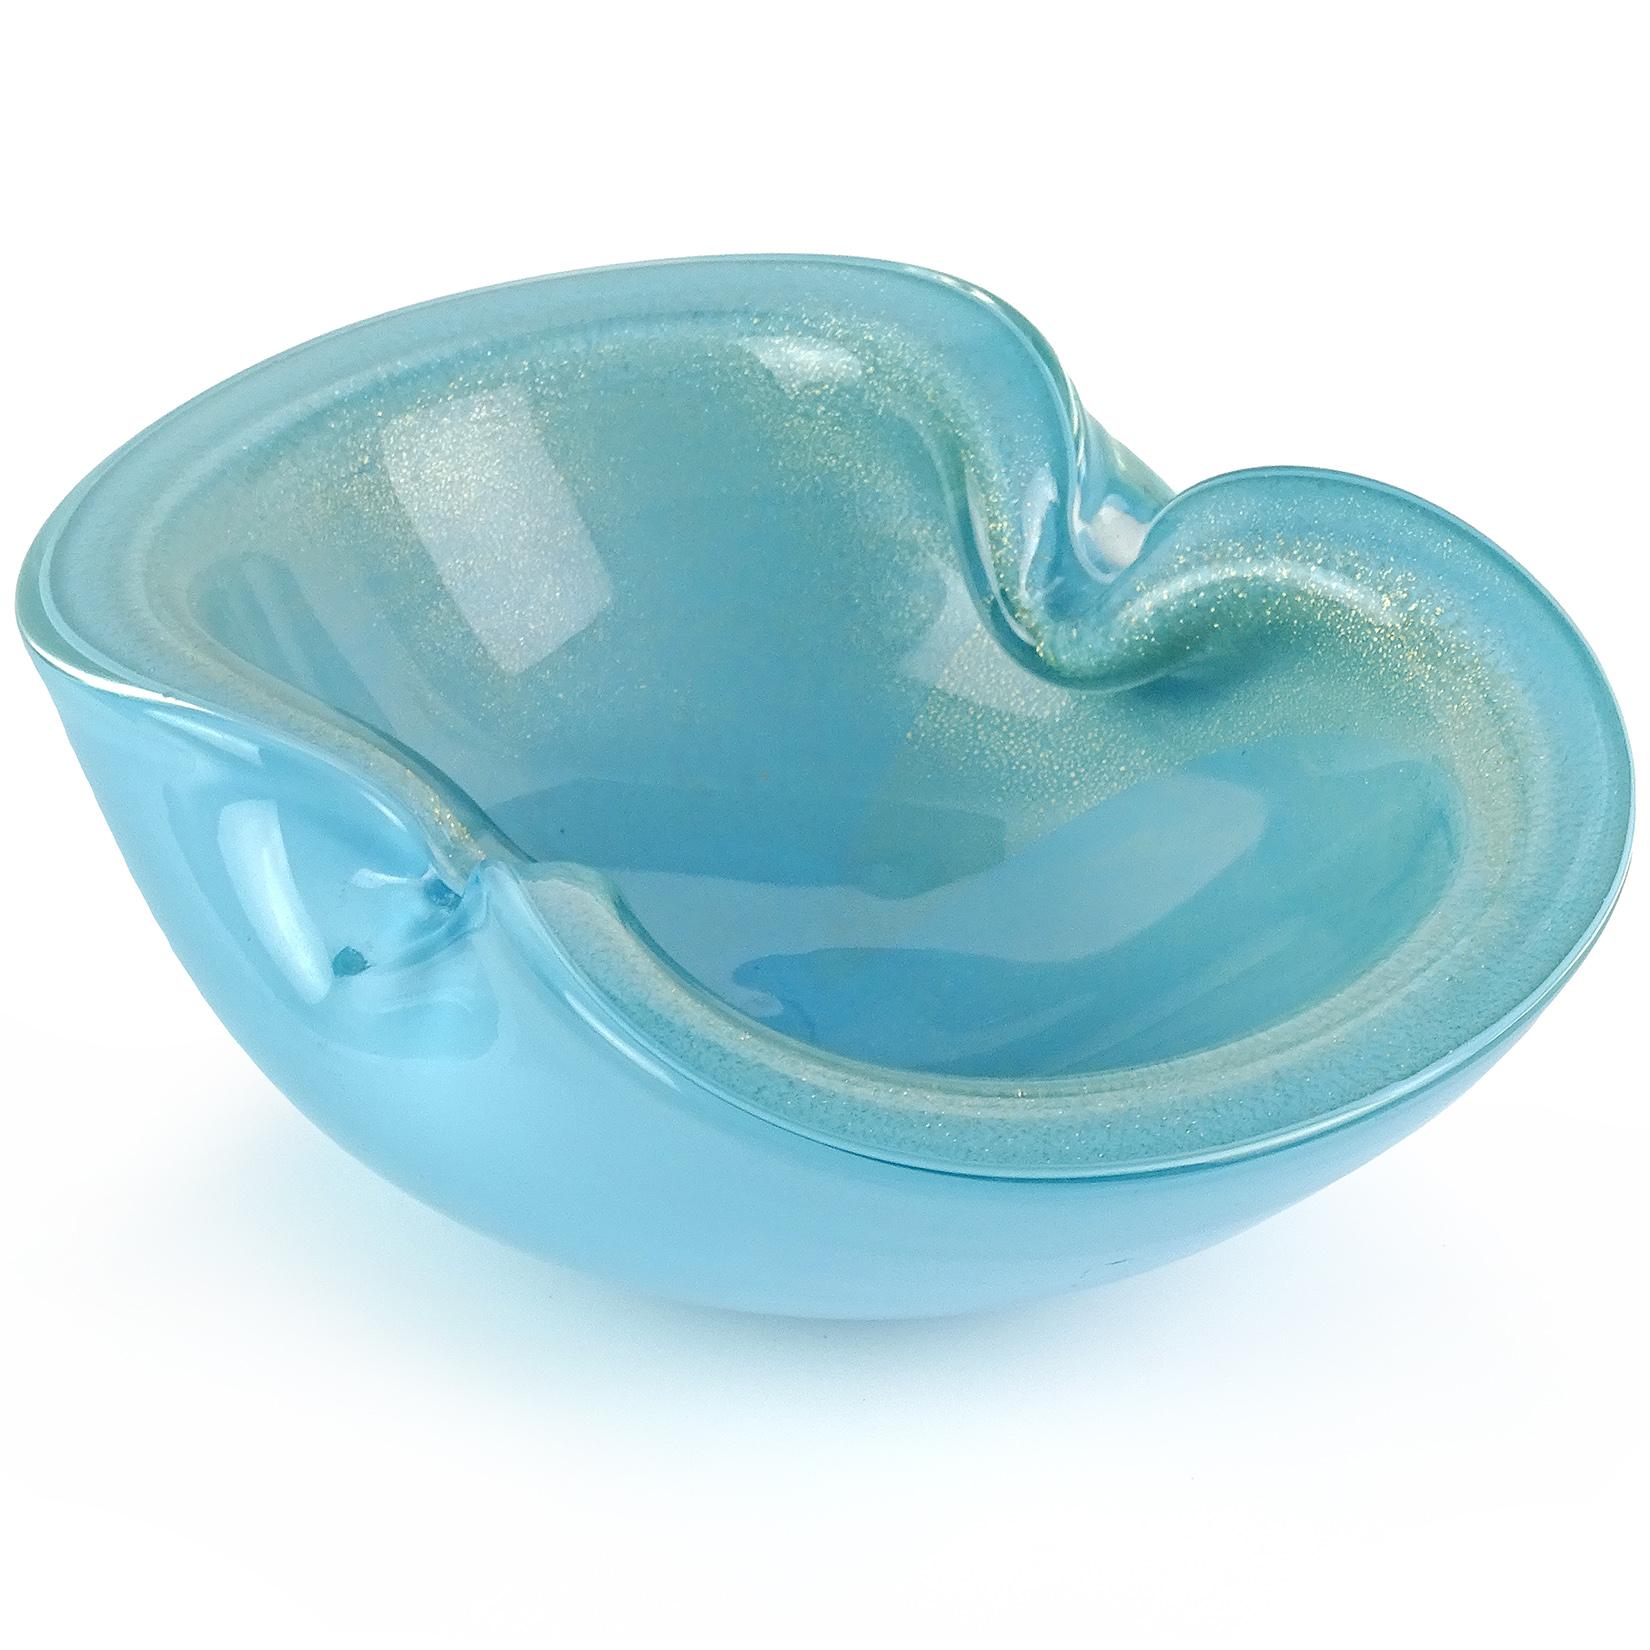 Beautiful Murano hand blown blue and gold flecks Italian art glass bowl / dish. Documented to designer Alfredo Barbini. Has heavy gold leaf on the inside of the bowl, with two indents on the rim. Measures: 7 1/4” long.